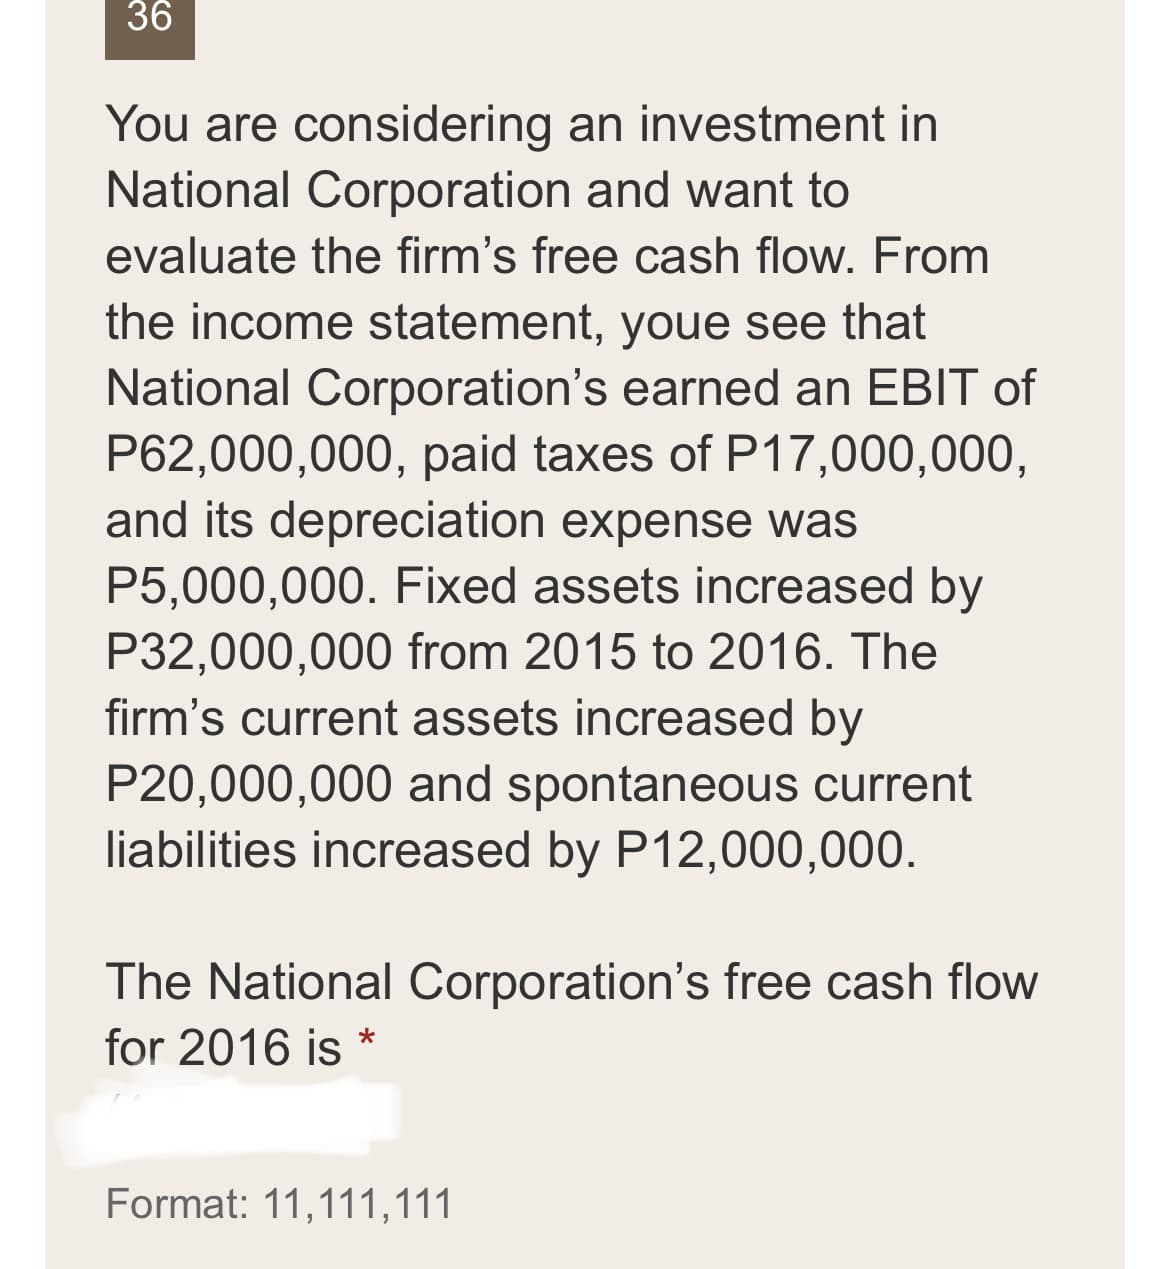 36
You are considering an investment in
National Corporation and want to
evaluate the firm's free cash flow. From
the income statement, youe see that
National Corporation's earned an EBIT of
P62,000,000, paid taxes of P17,000,000,
and its depreciation expense was
P5,000,000. Fixed assets increased by
P32,000,000 from 2015 to 2016. The
firm's current assets increased by
P20,000,000 and spontaneous current
liabilities increased by P12,000,000.
The National Corporation's free cash flow
for 2016 is *
Format: 11,111,111
